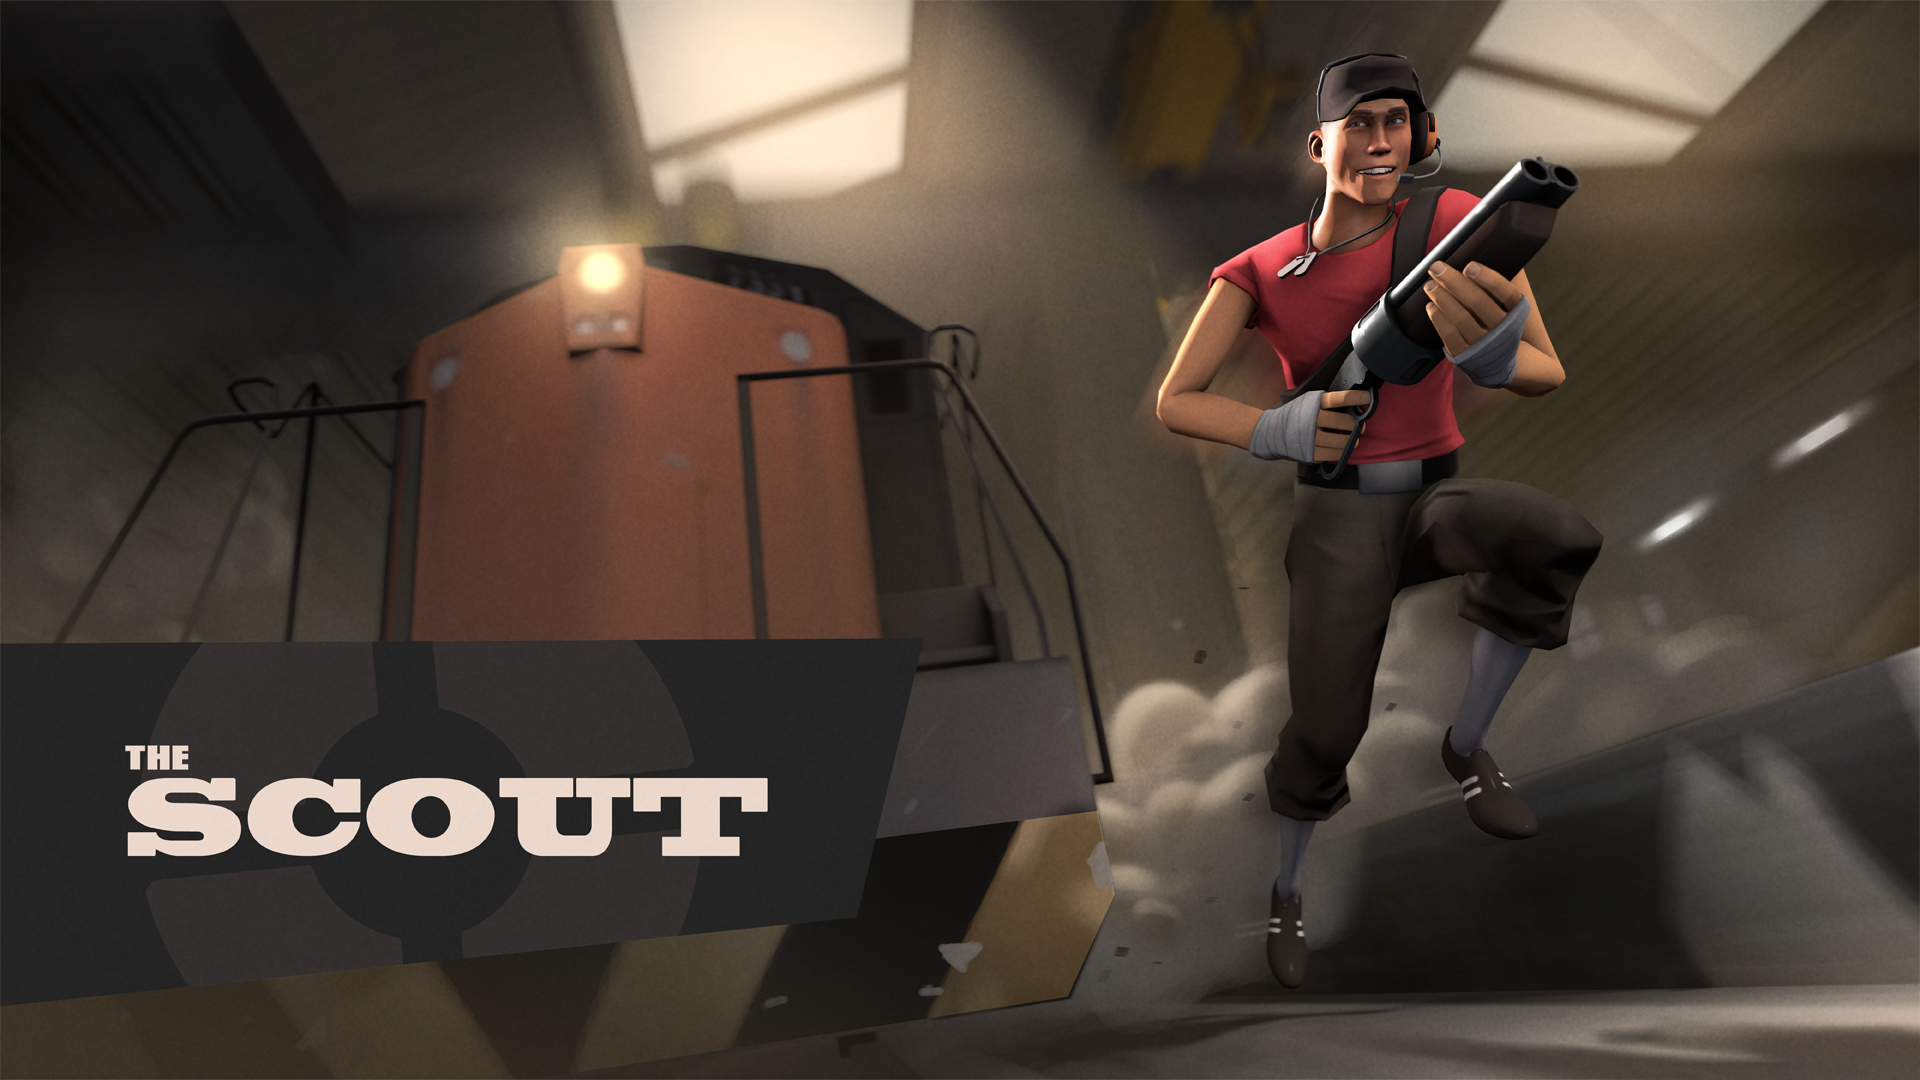 1920x1080 Steam Game Card Wallpaper Scout Cromos de Steam Official TF2 Wiki | Official Team Fortress Wiki | Team fortress 2, Team fortress, Fortress 2